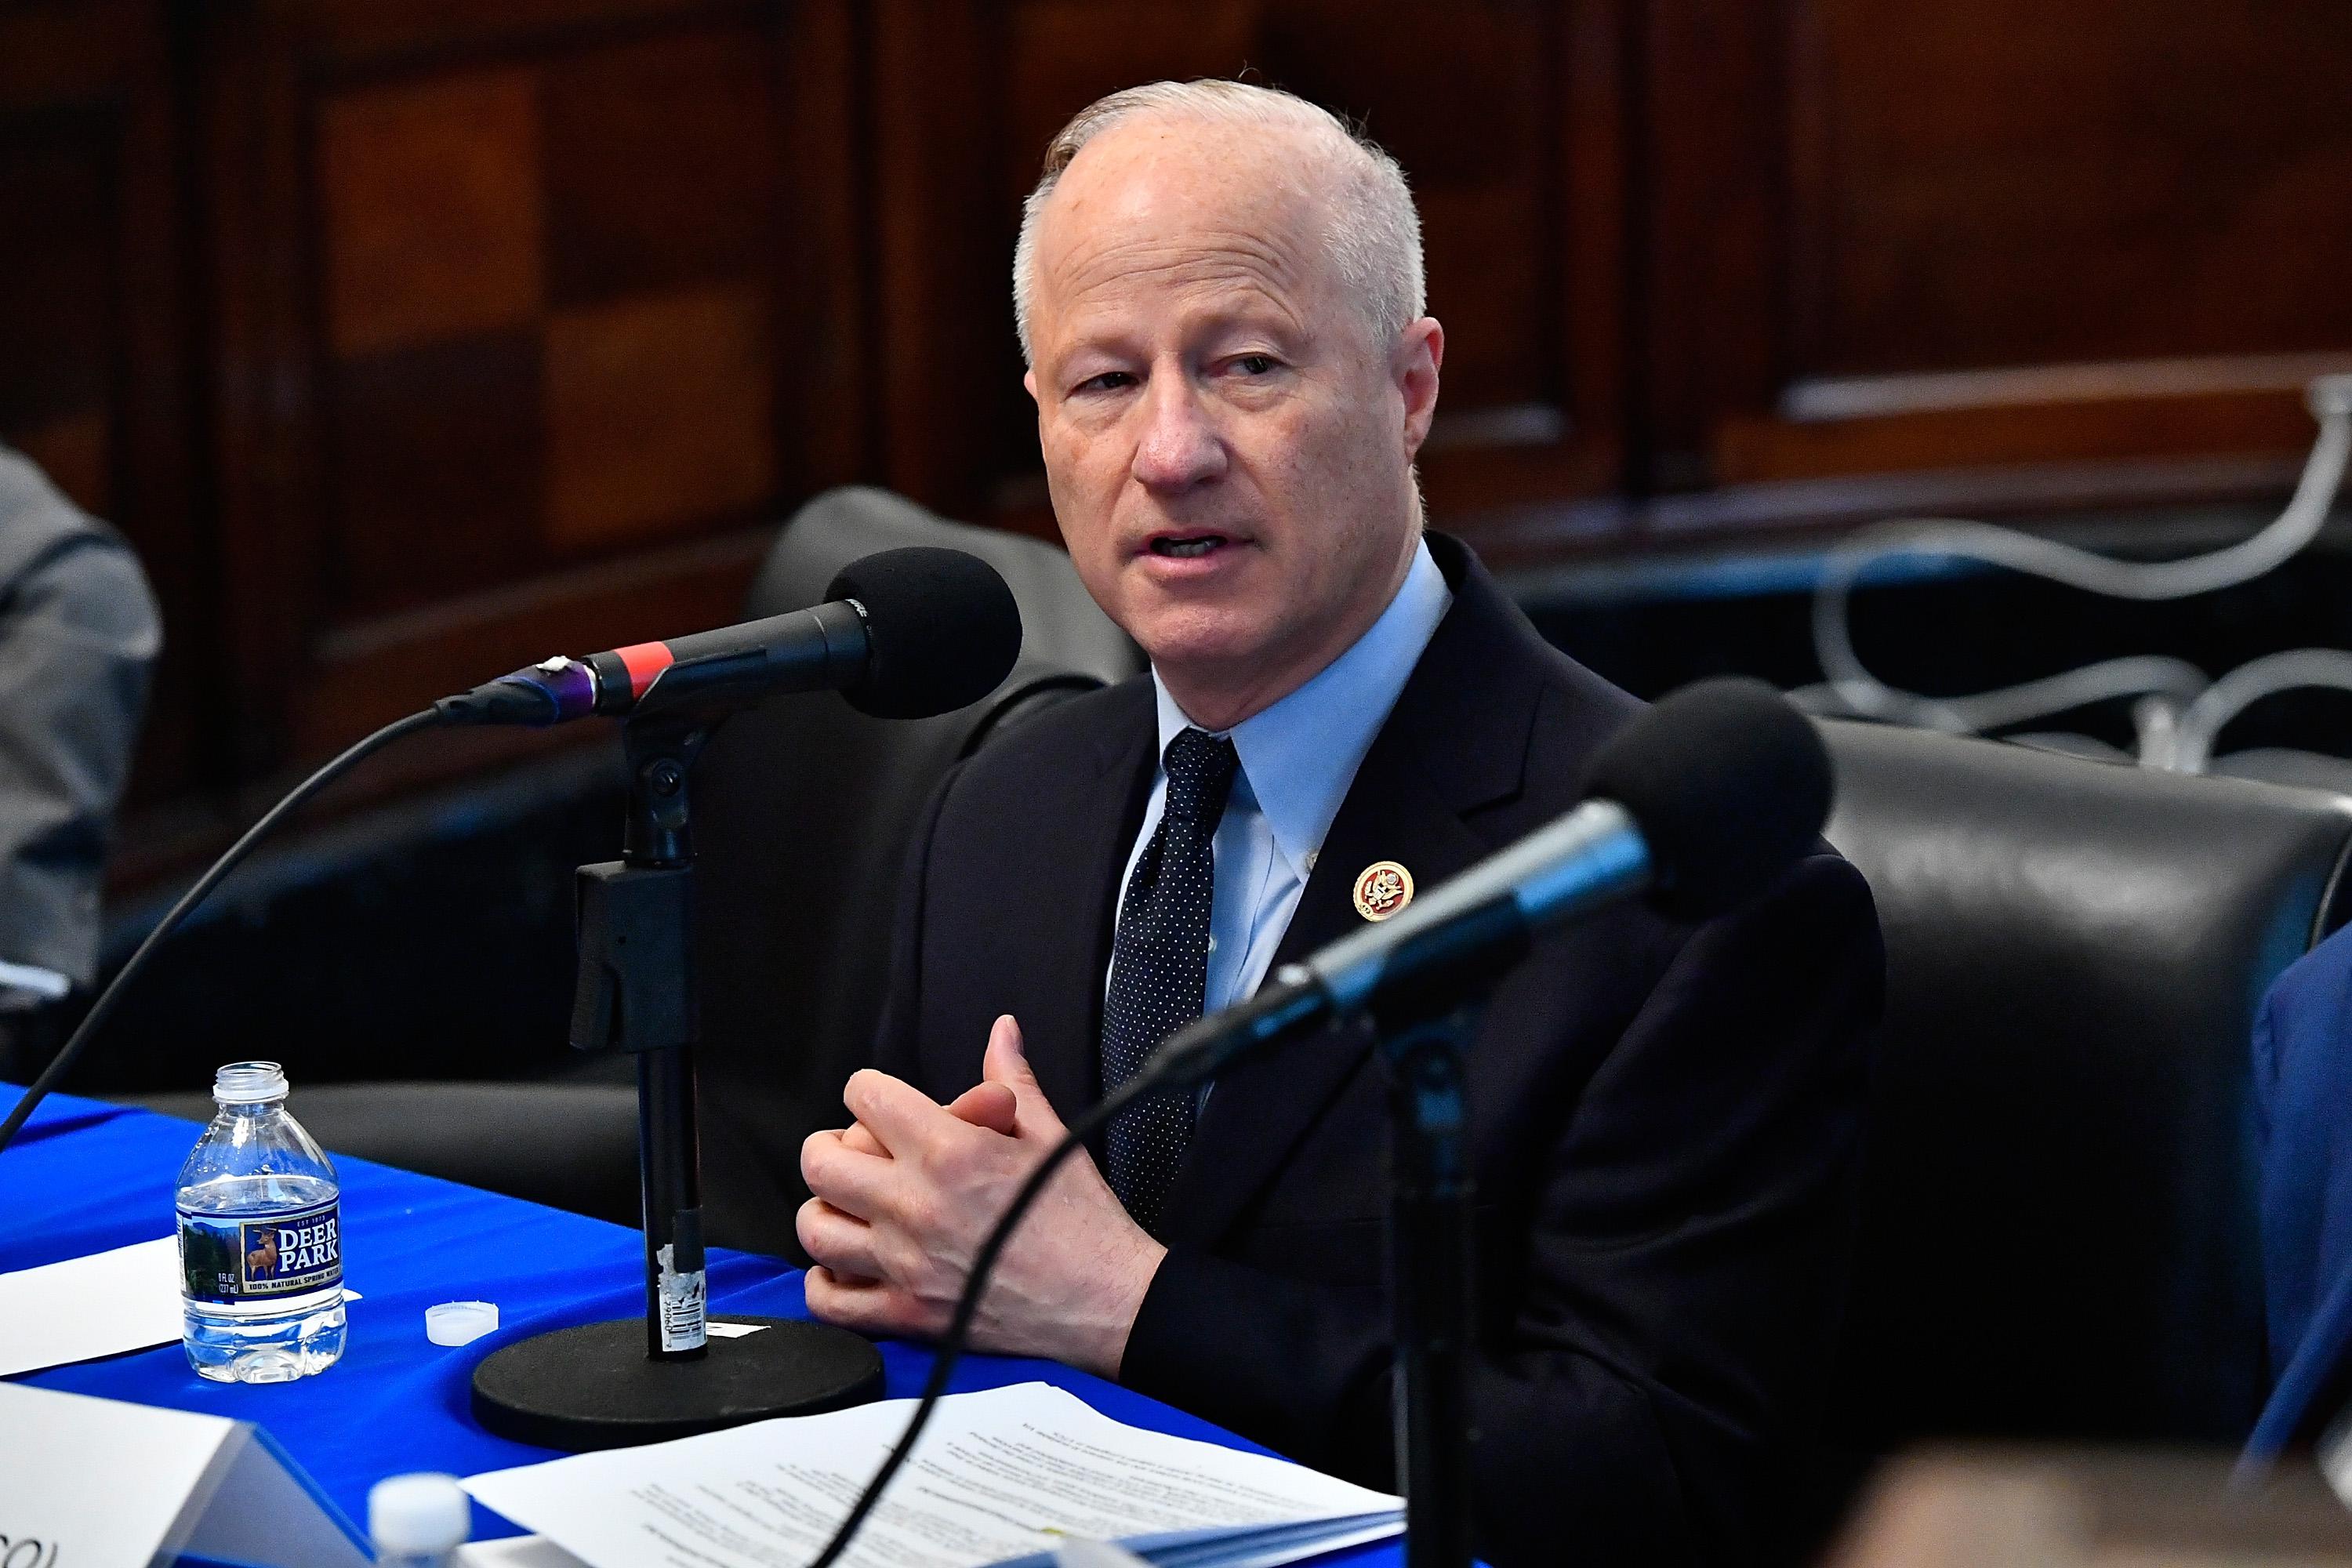 Rep. Mike Coffman appears on at a SiriusXM event on Capitol Hill.